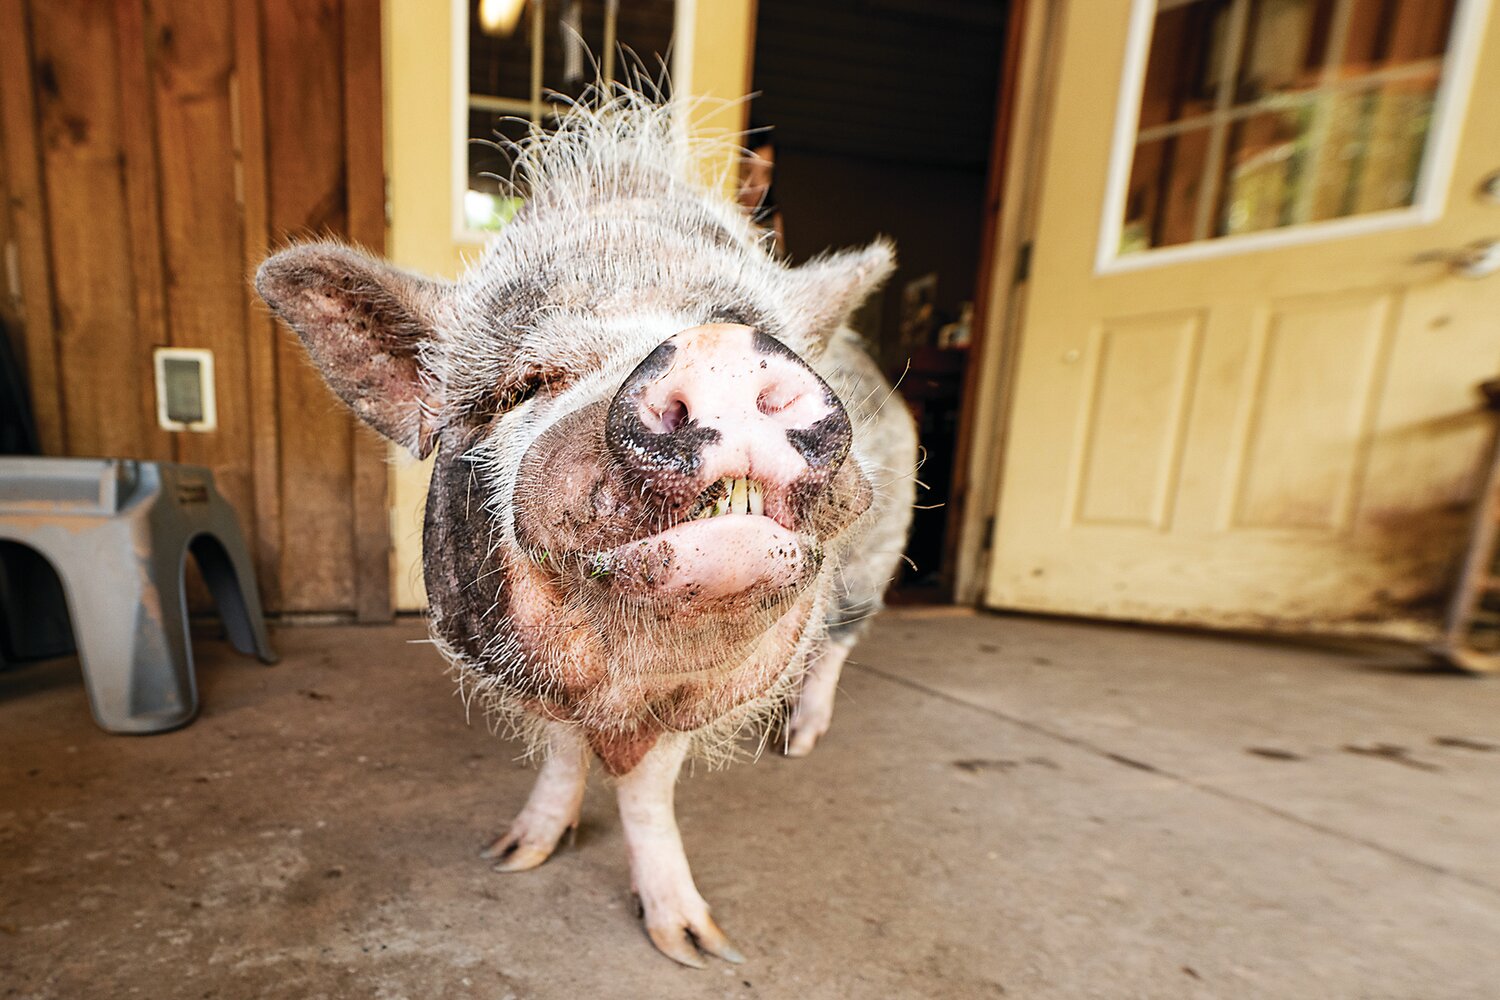 Ross Mill Farm is also a foster home that is tied to the Pig Placement Network, a non-profit organization that cares for potbellied pigs who are waiting to be adopted.